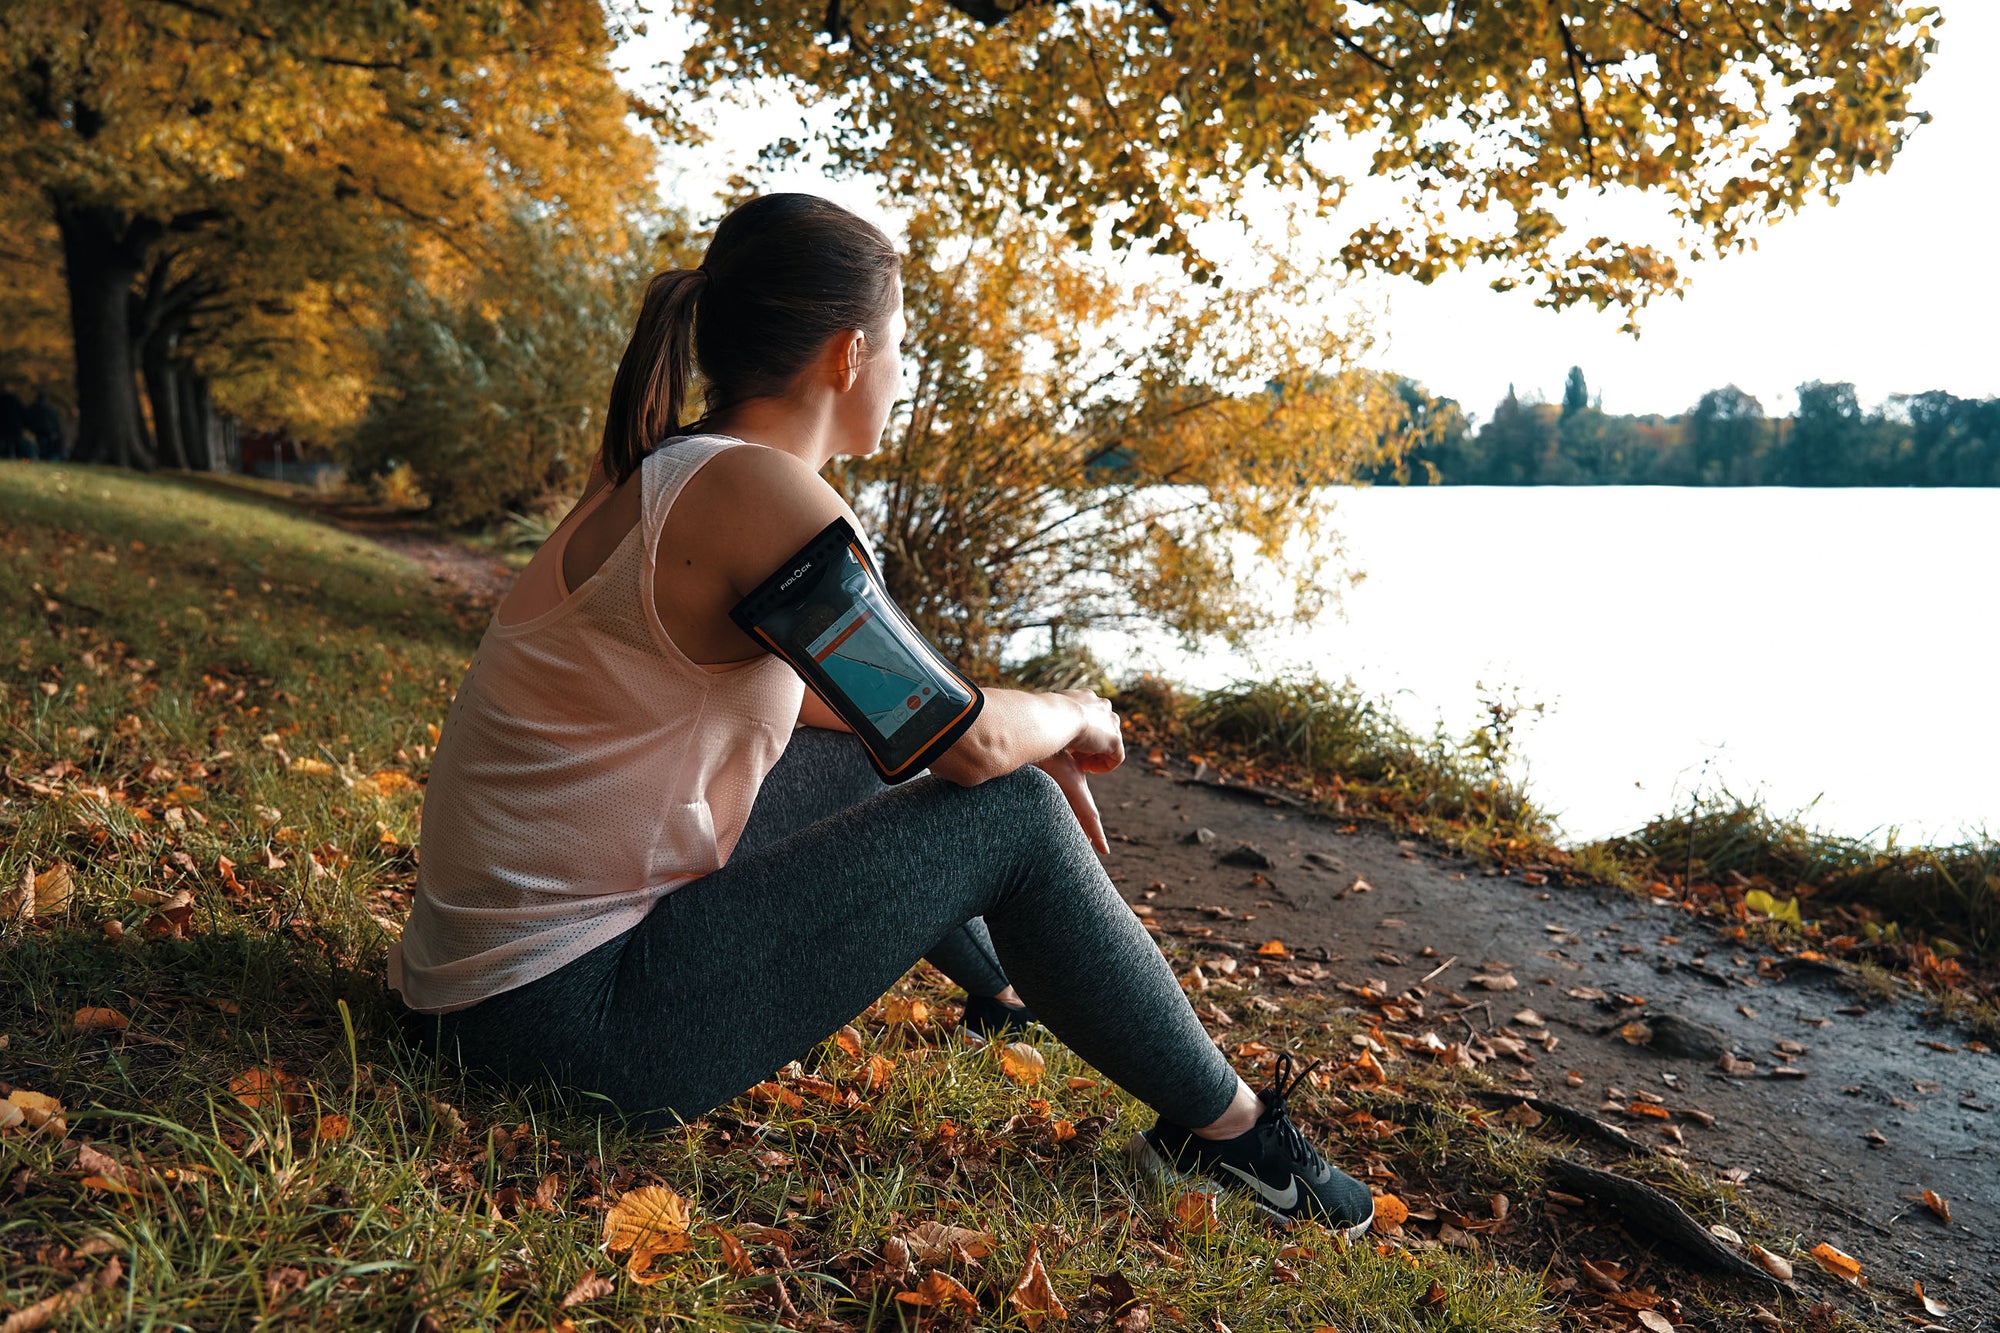 Woman wearing Fidlock Phone Arm Band while sitting by river